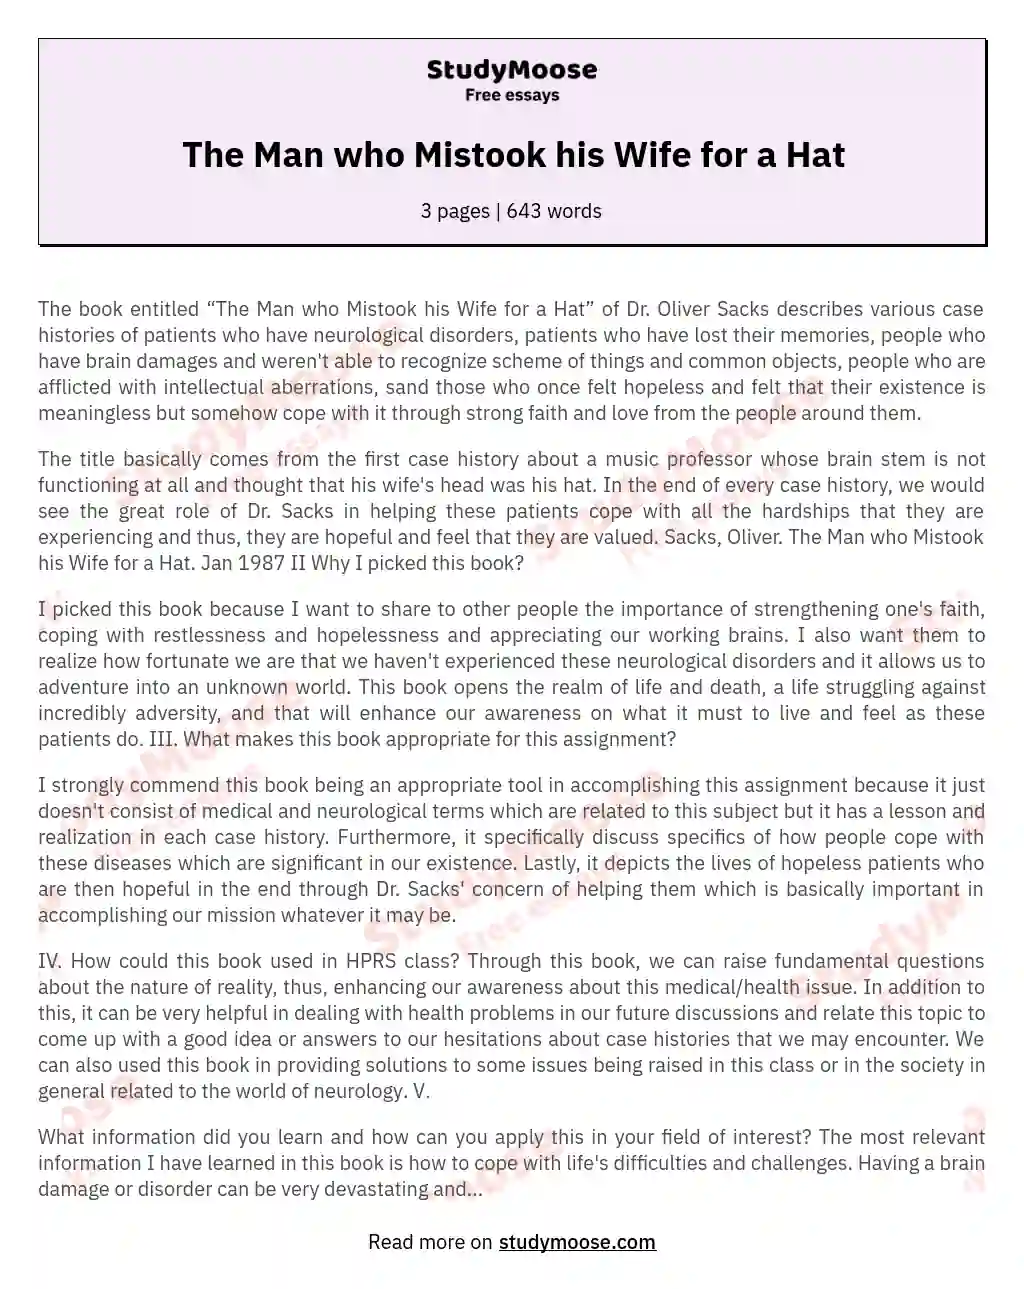 The Man who Mistook his Wife for a Hat essay